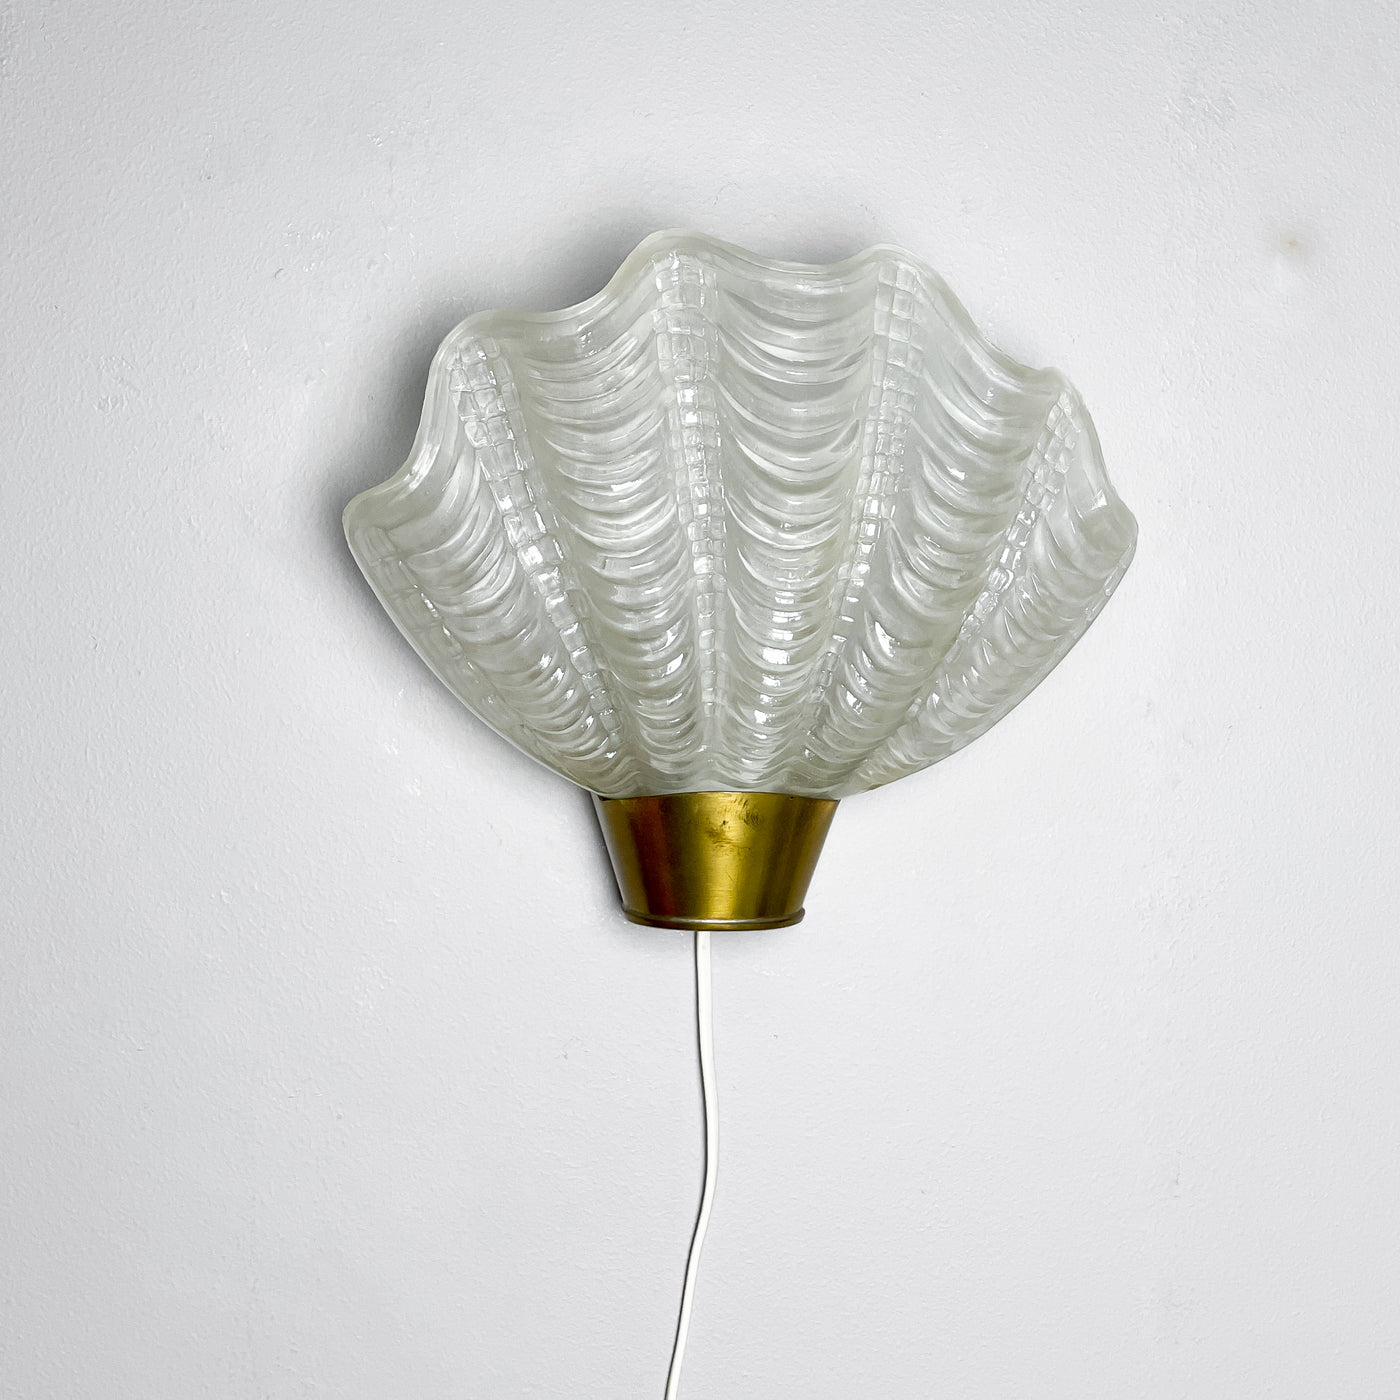 Asea vägglampa ”Coquille”